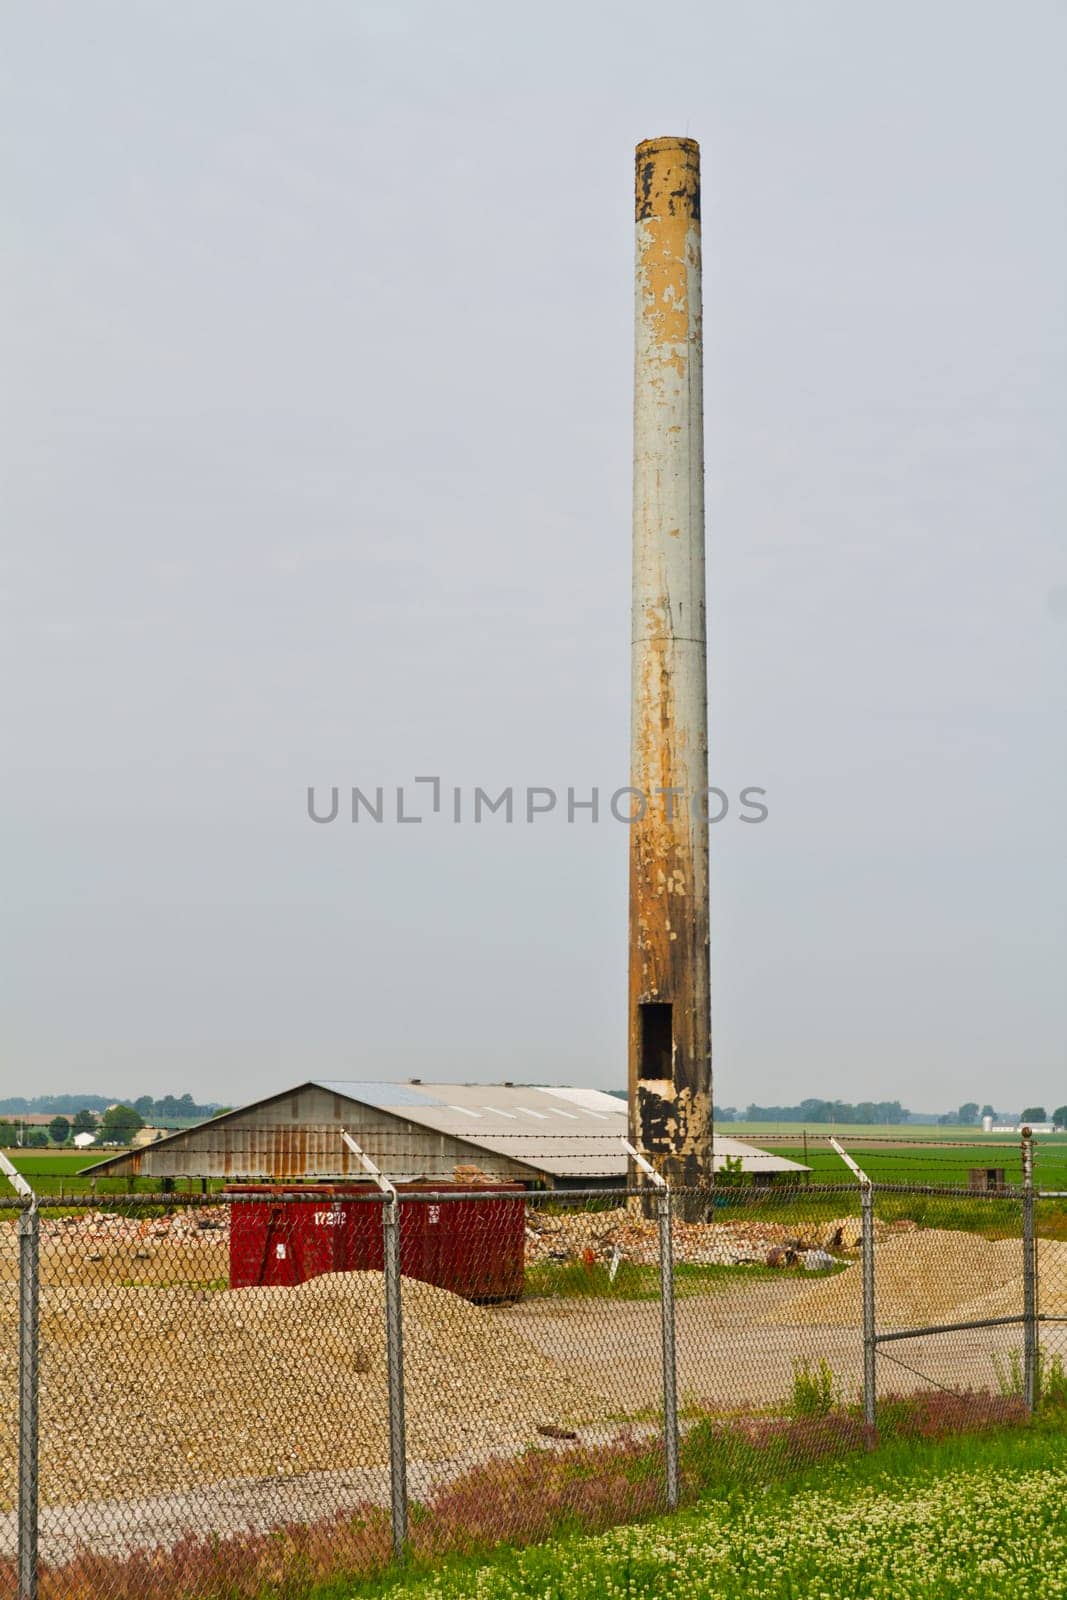 Capturing the faded grandeur of an abandoned industrial site in Evansville, Indiana. A towering smokestack looms over a neglected warehouse in the tranquil rural setting, evoking themes of industrial decline and the passage of time.